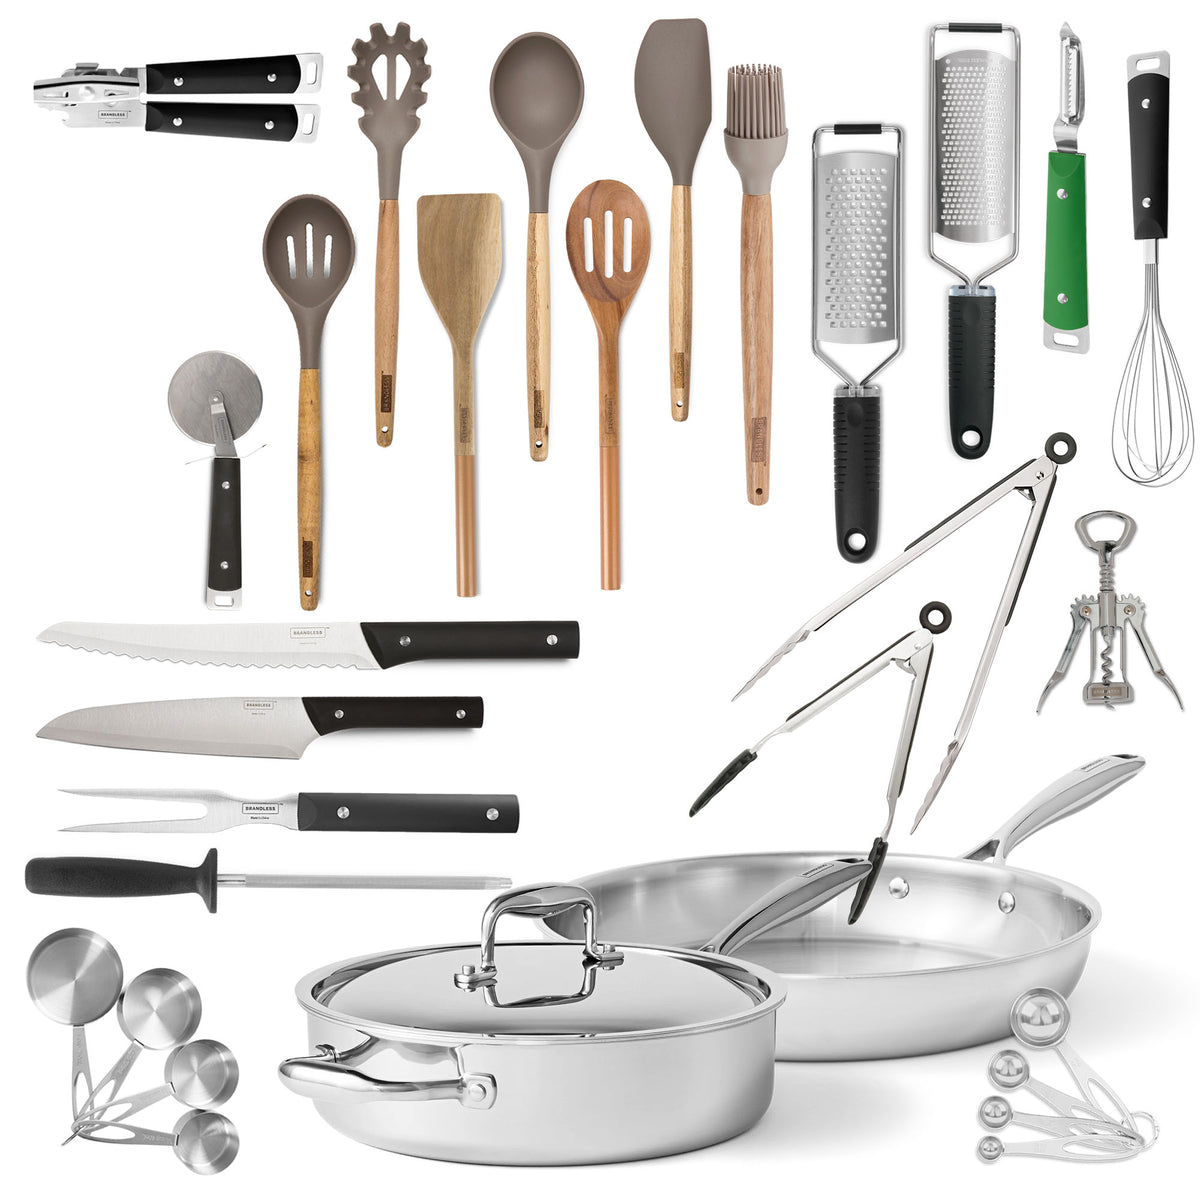 Image of all the products in the bundle, top view.  Includes an array of silicone utensils, kitchen prep tools, and cookware.